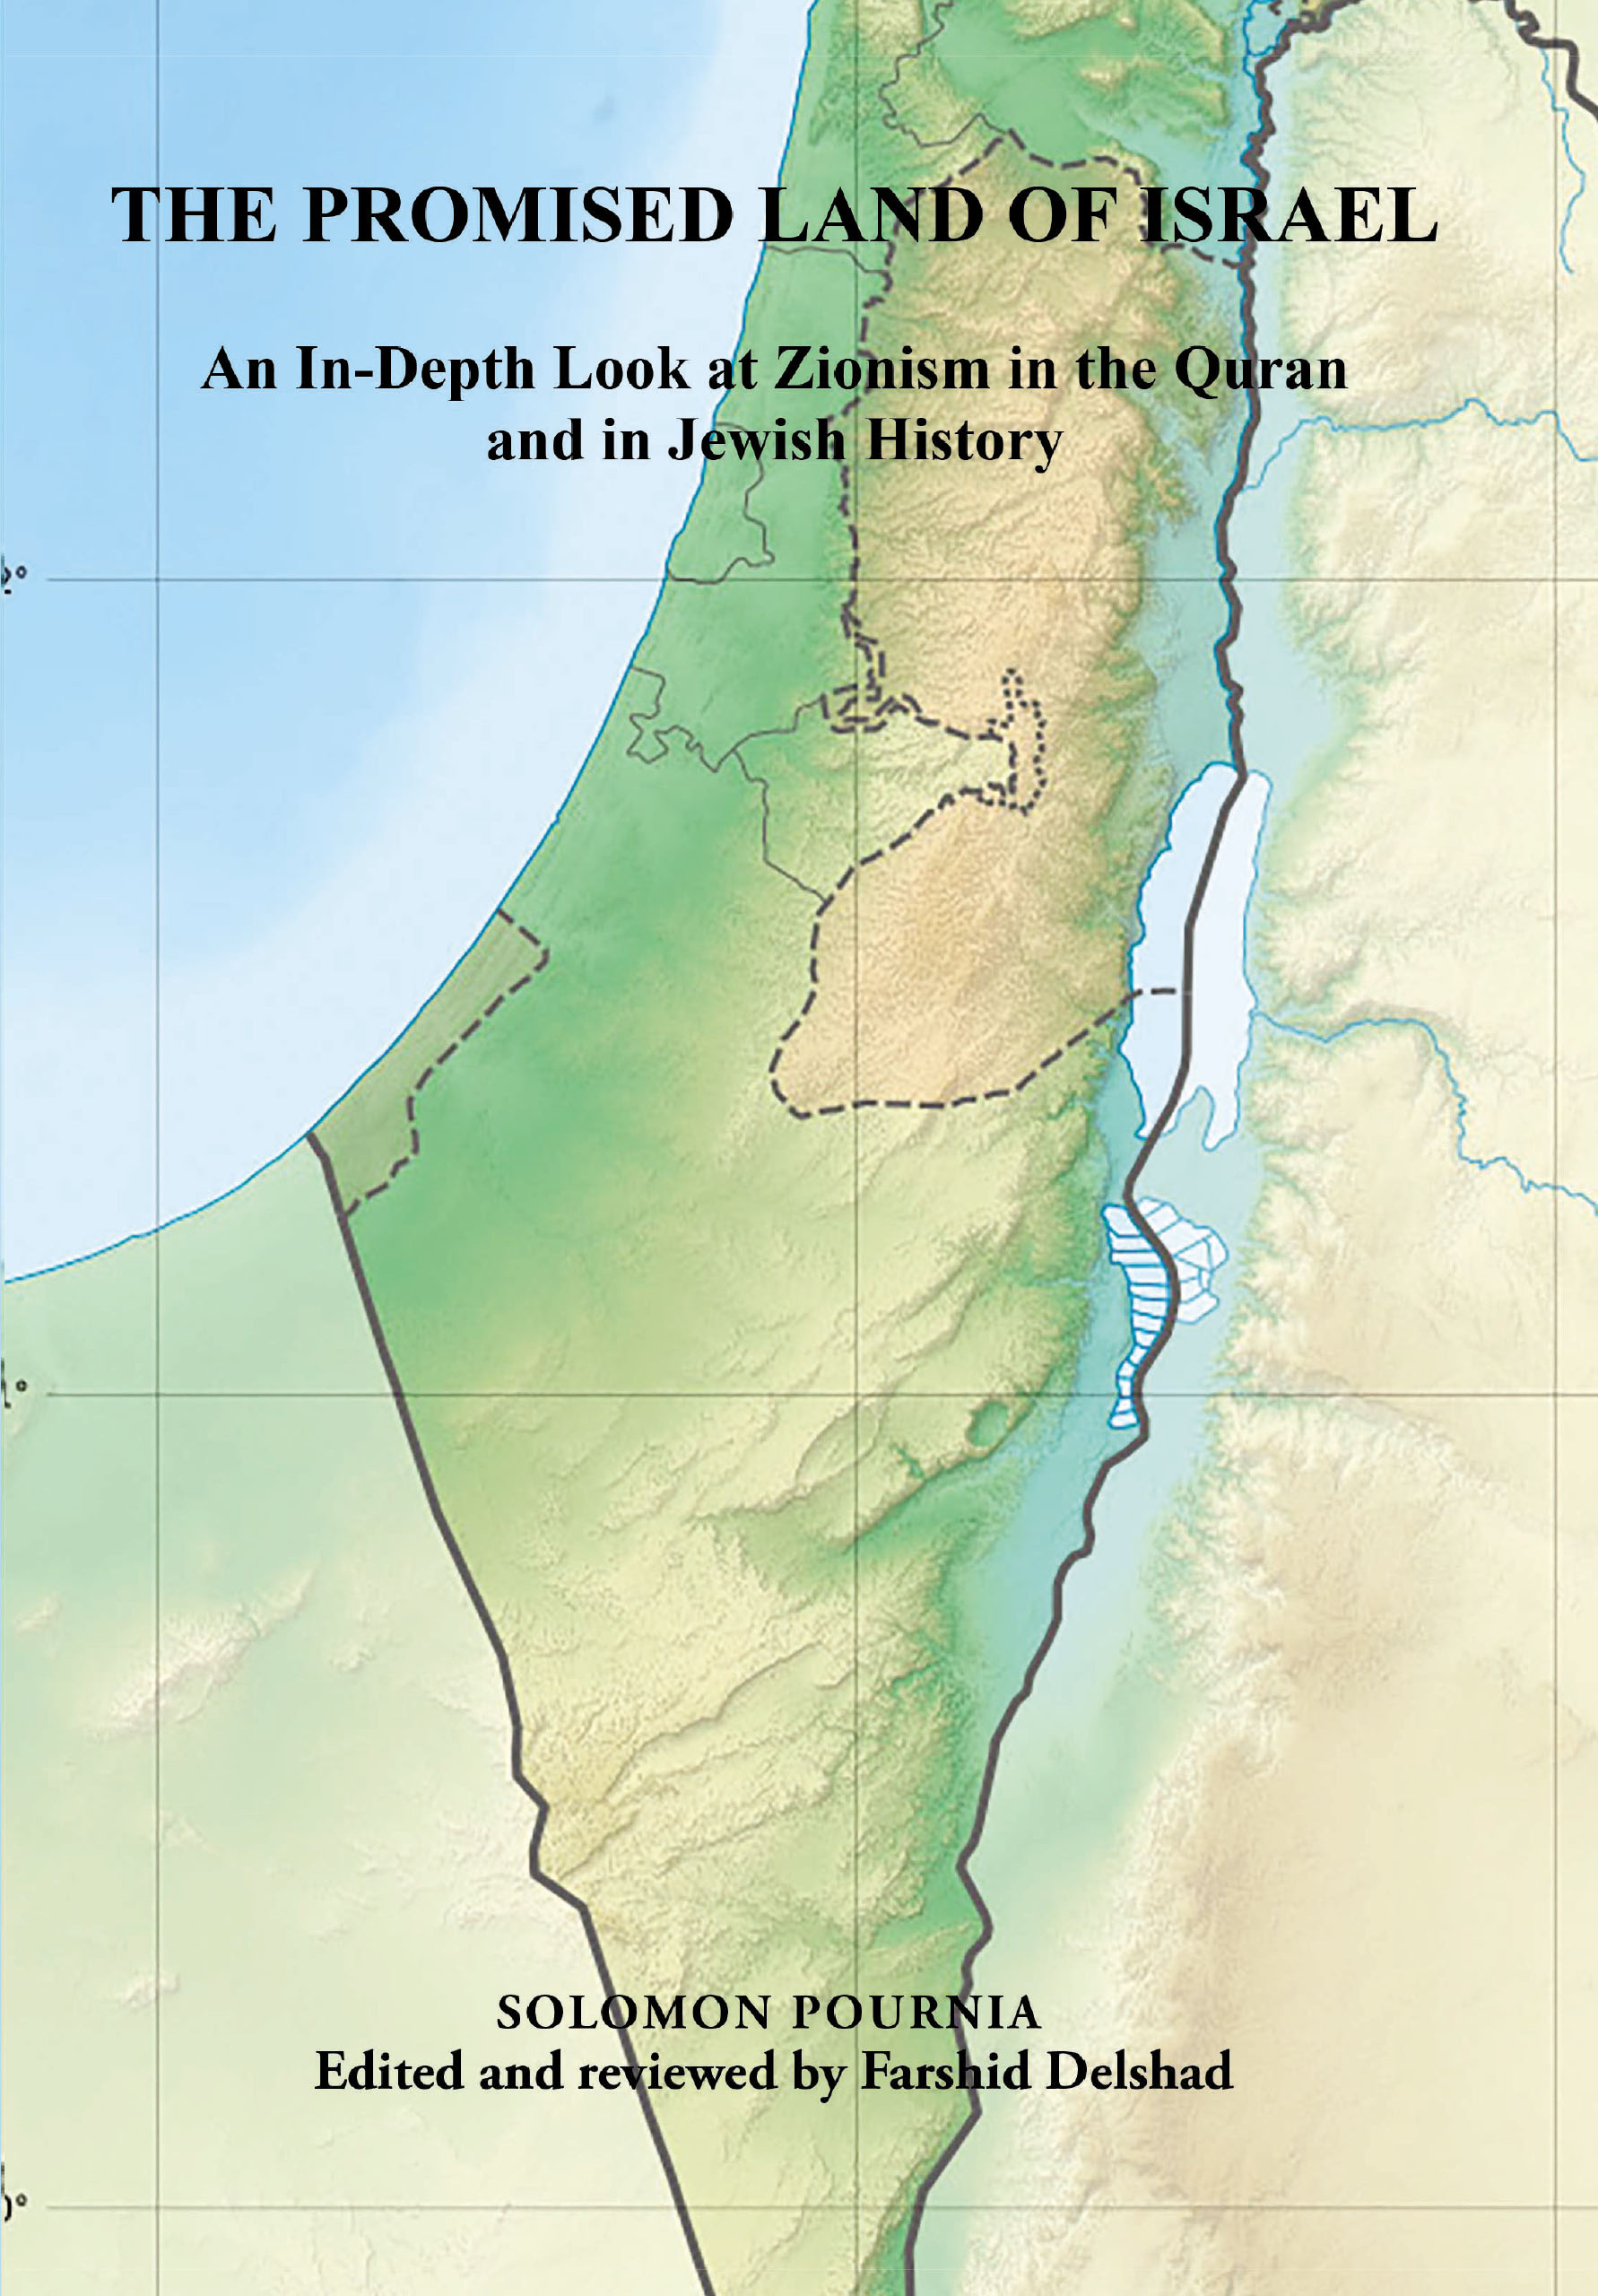 Solomon Pournia’s New Book, “THE PROMISED LAND OF ISRAEL: An In-Depth Look at Zionism in the Quran and in Jewish History,” Offers New Perspectives on Complex Issues